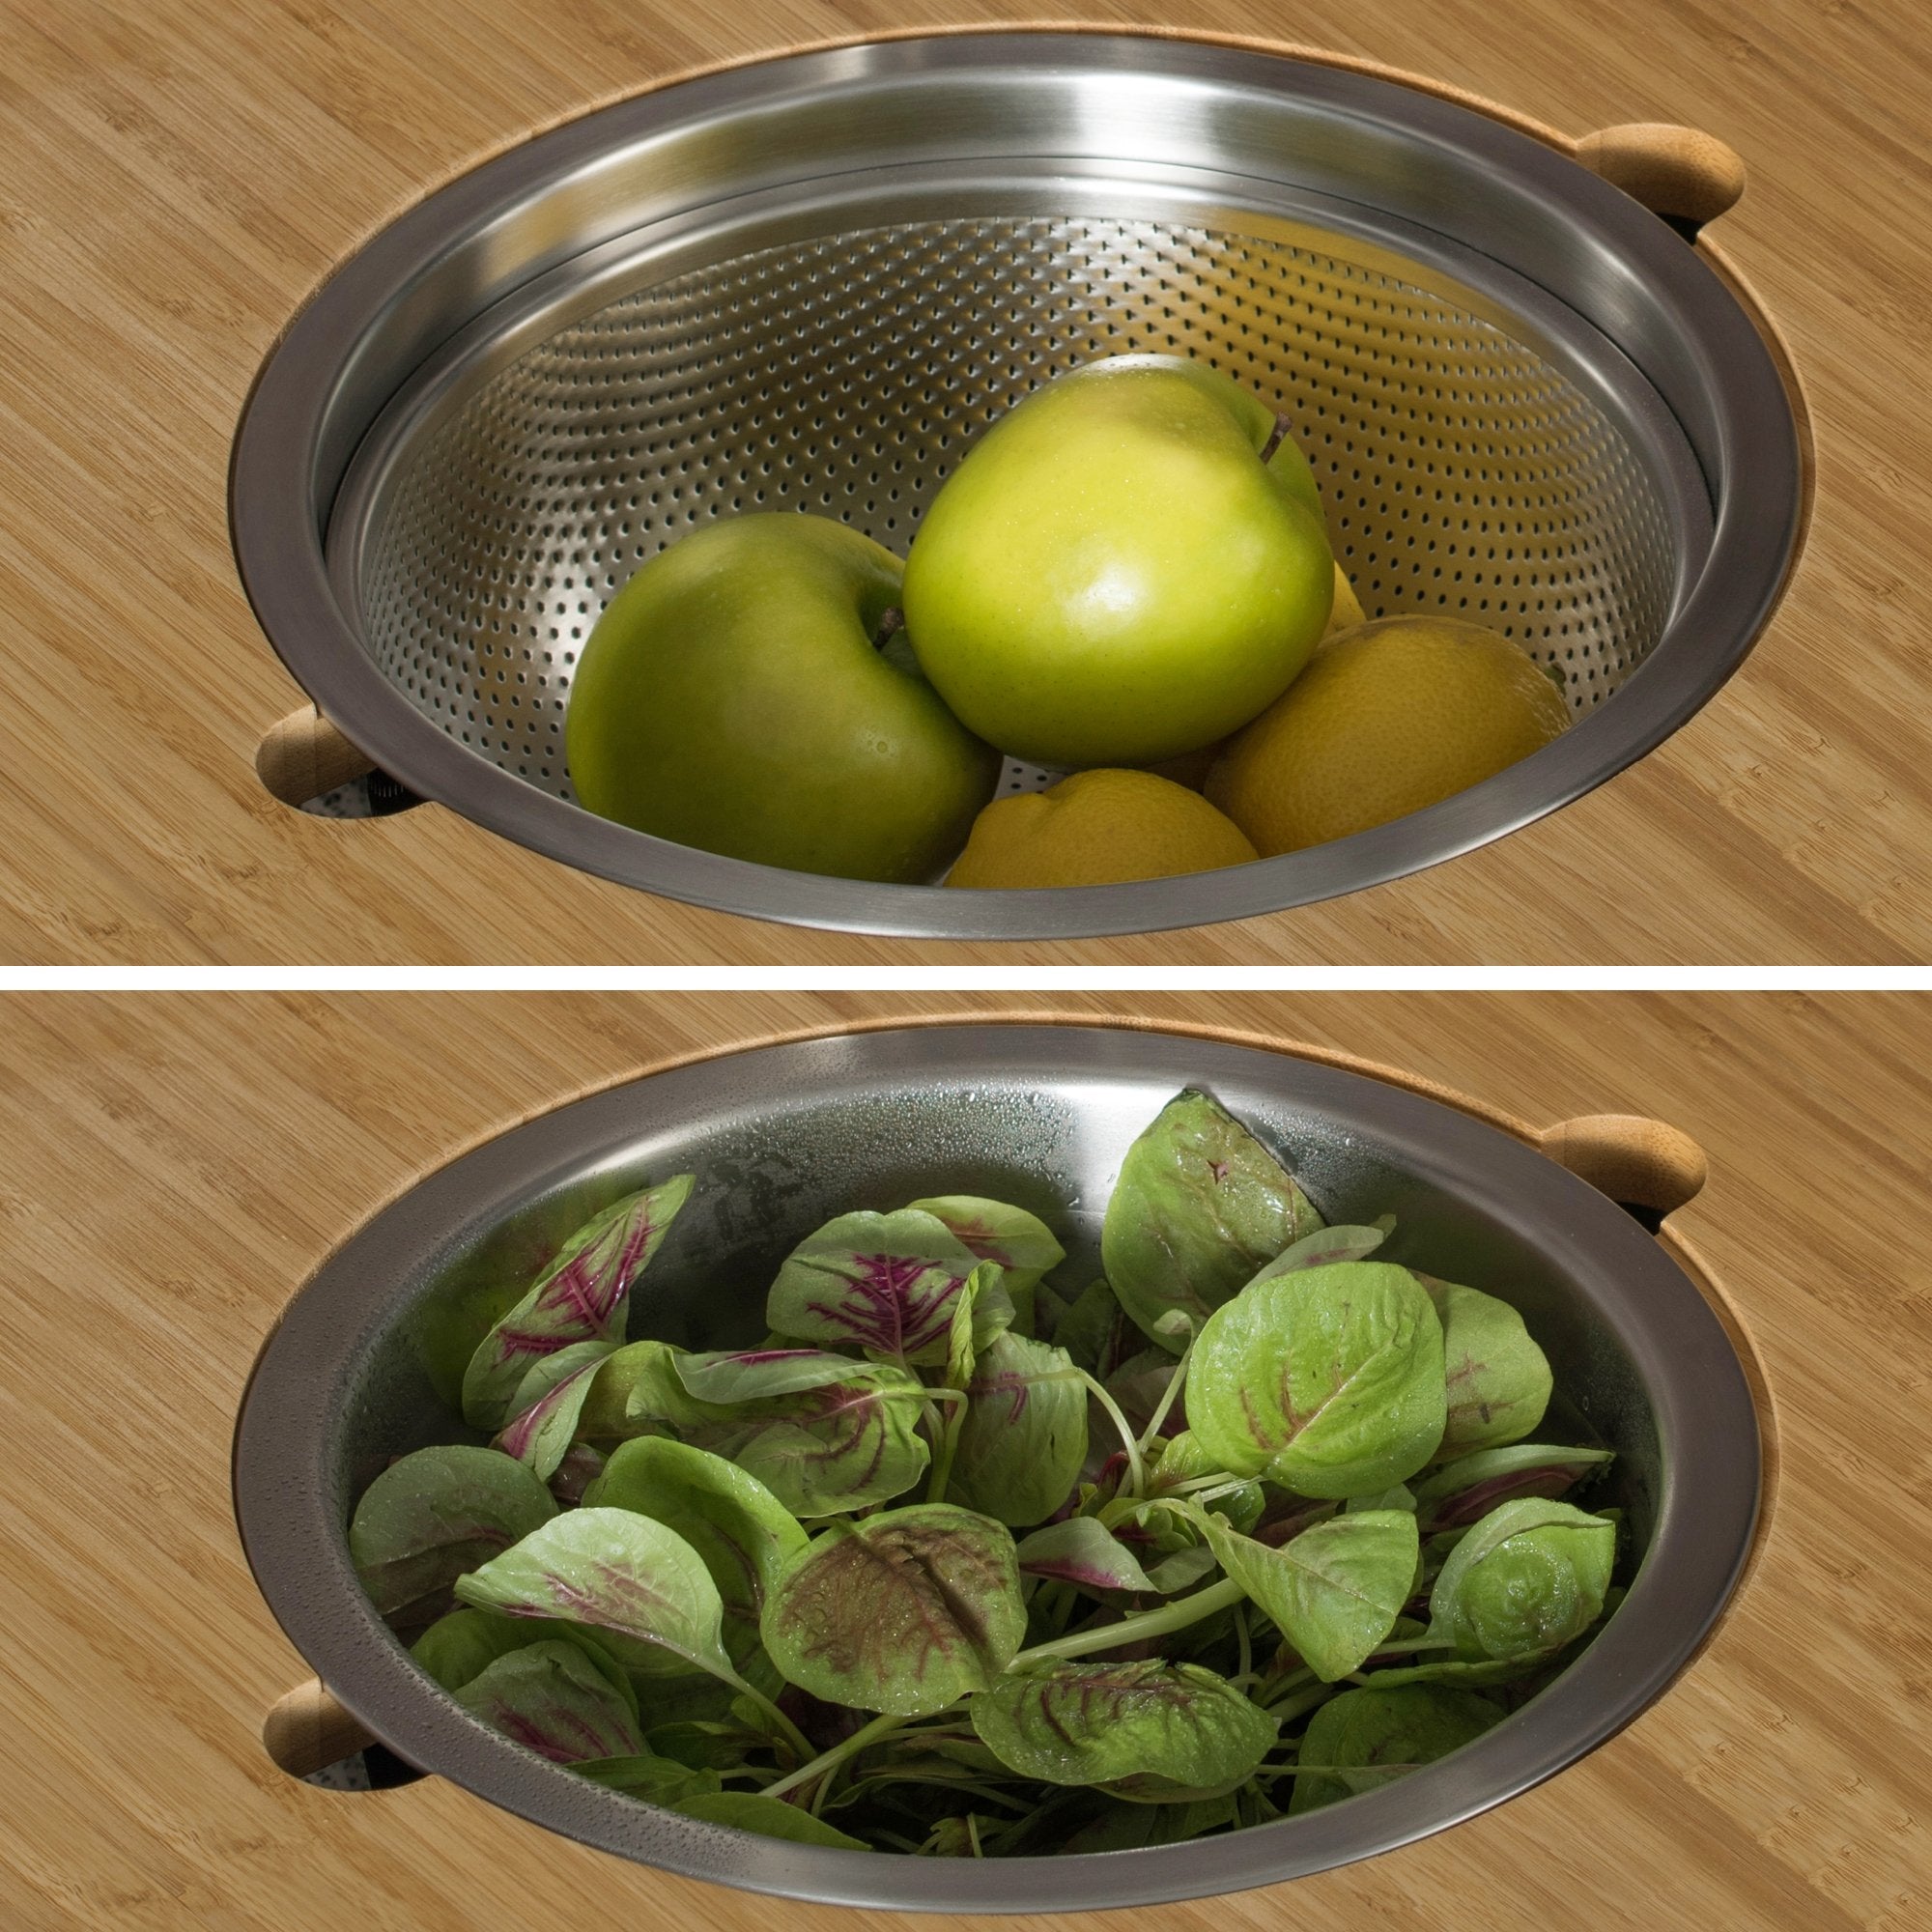 Large Salad Spinner with Drain, Bowl, and Colander